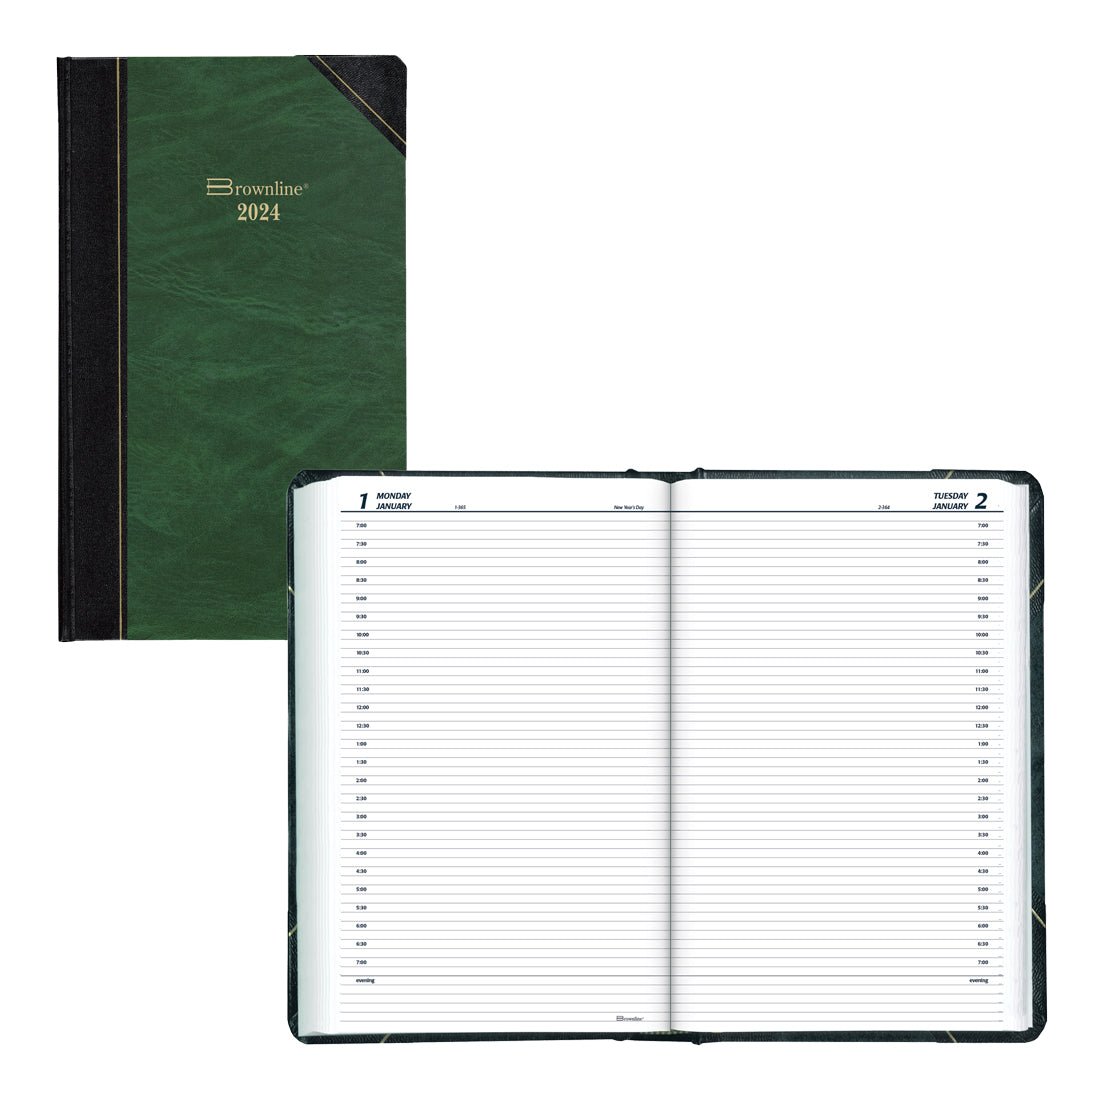 Pontoon Saying Funny Pontoon Boat Accessories Pretty: Daily planner  notebook, To-do list, 6 inch wide x 9 inch high, 120 pages: Powell,  Stephanie: 9798830137836: : Books